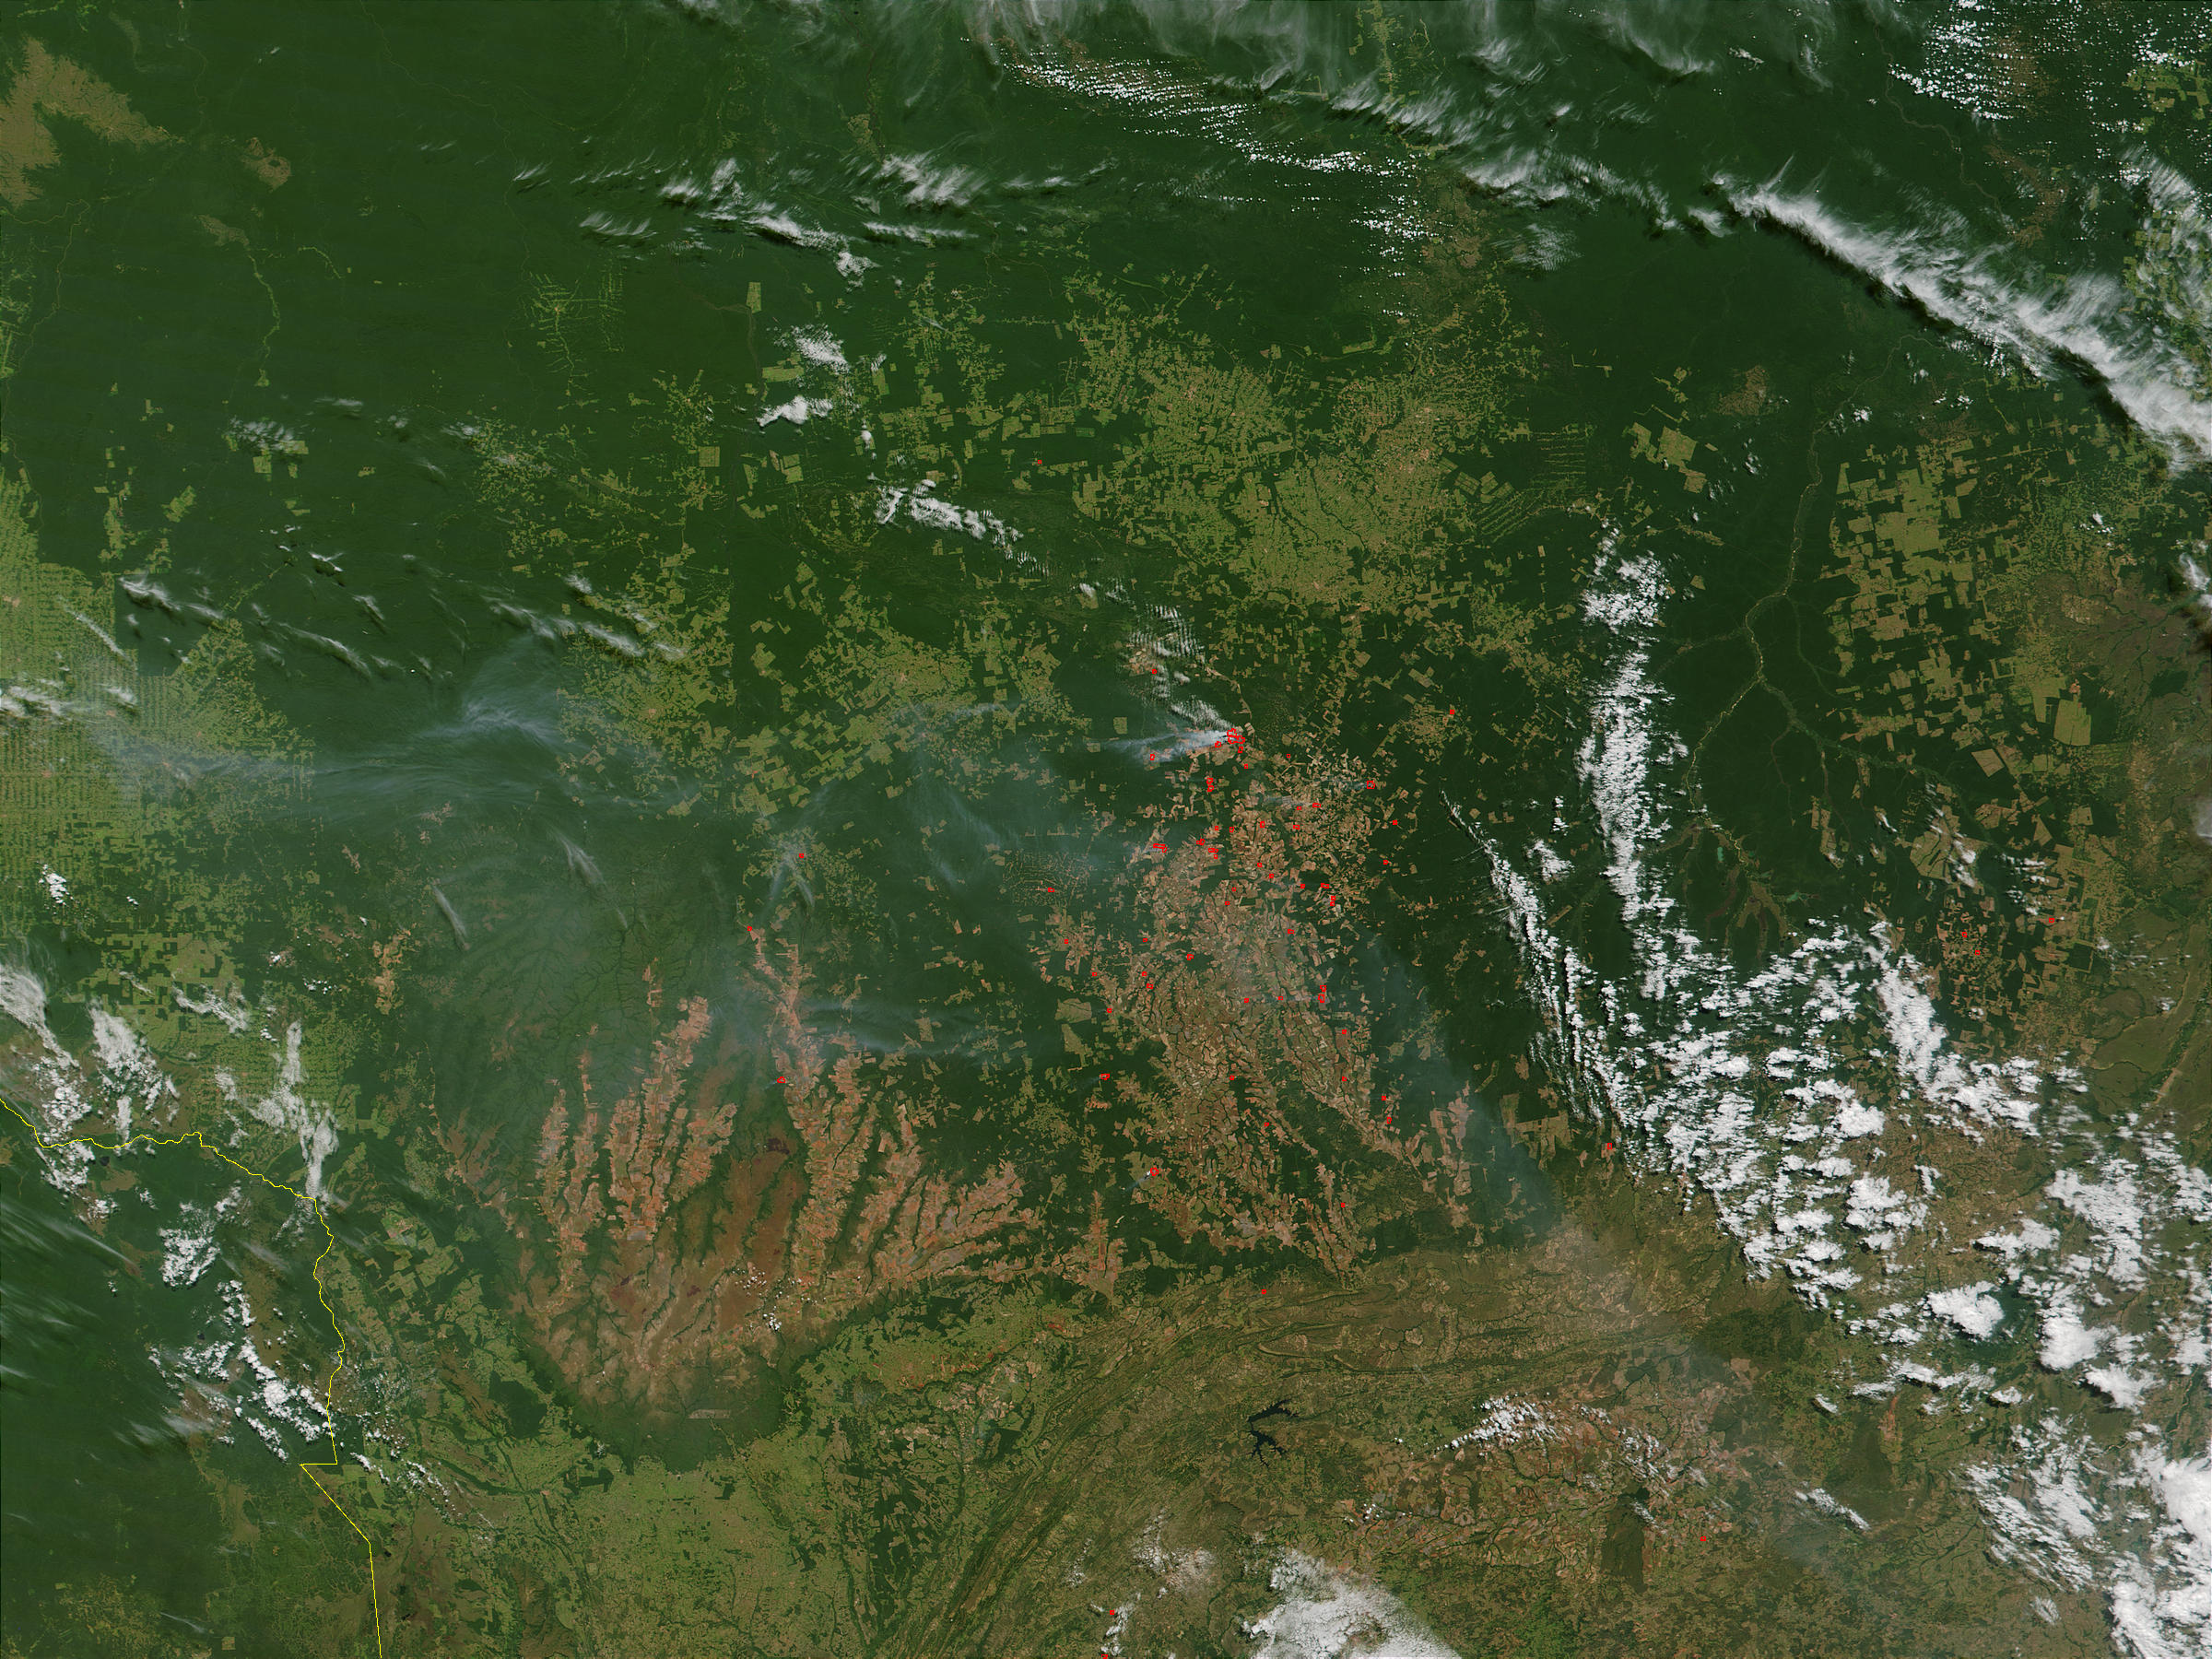 Fires in Mato Grosso State, Brazil - related image preview